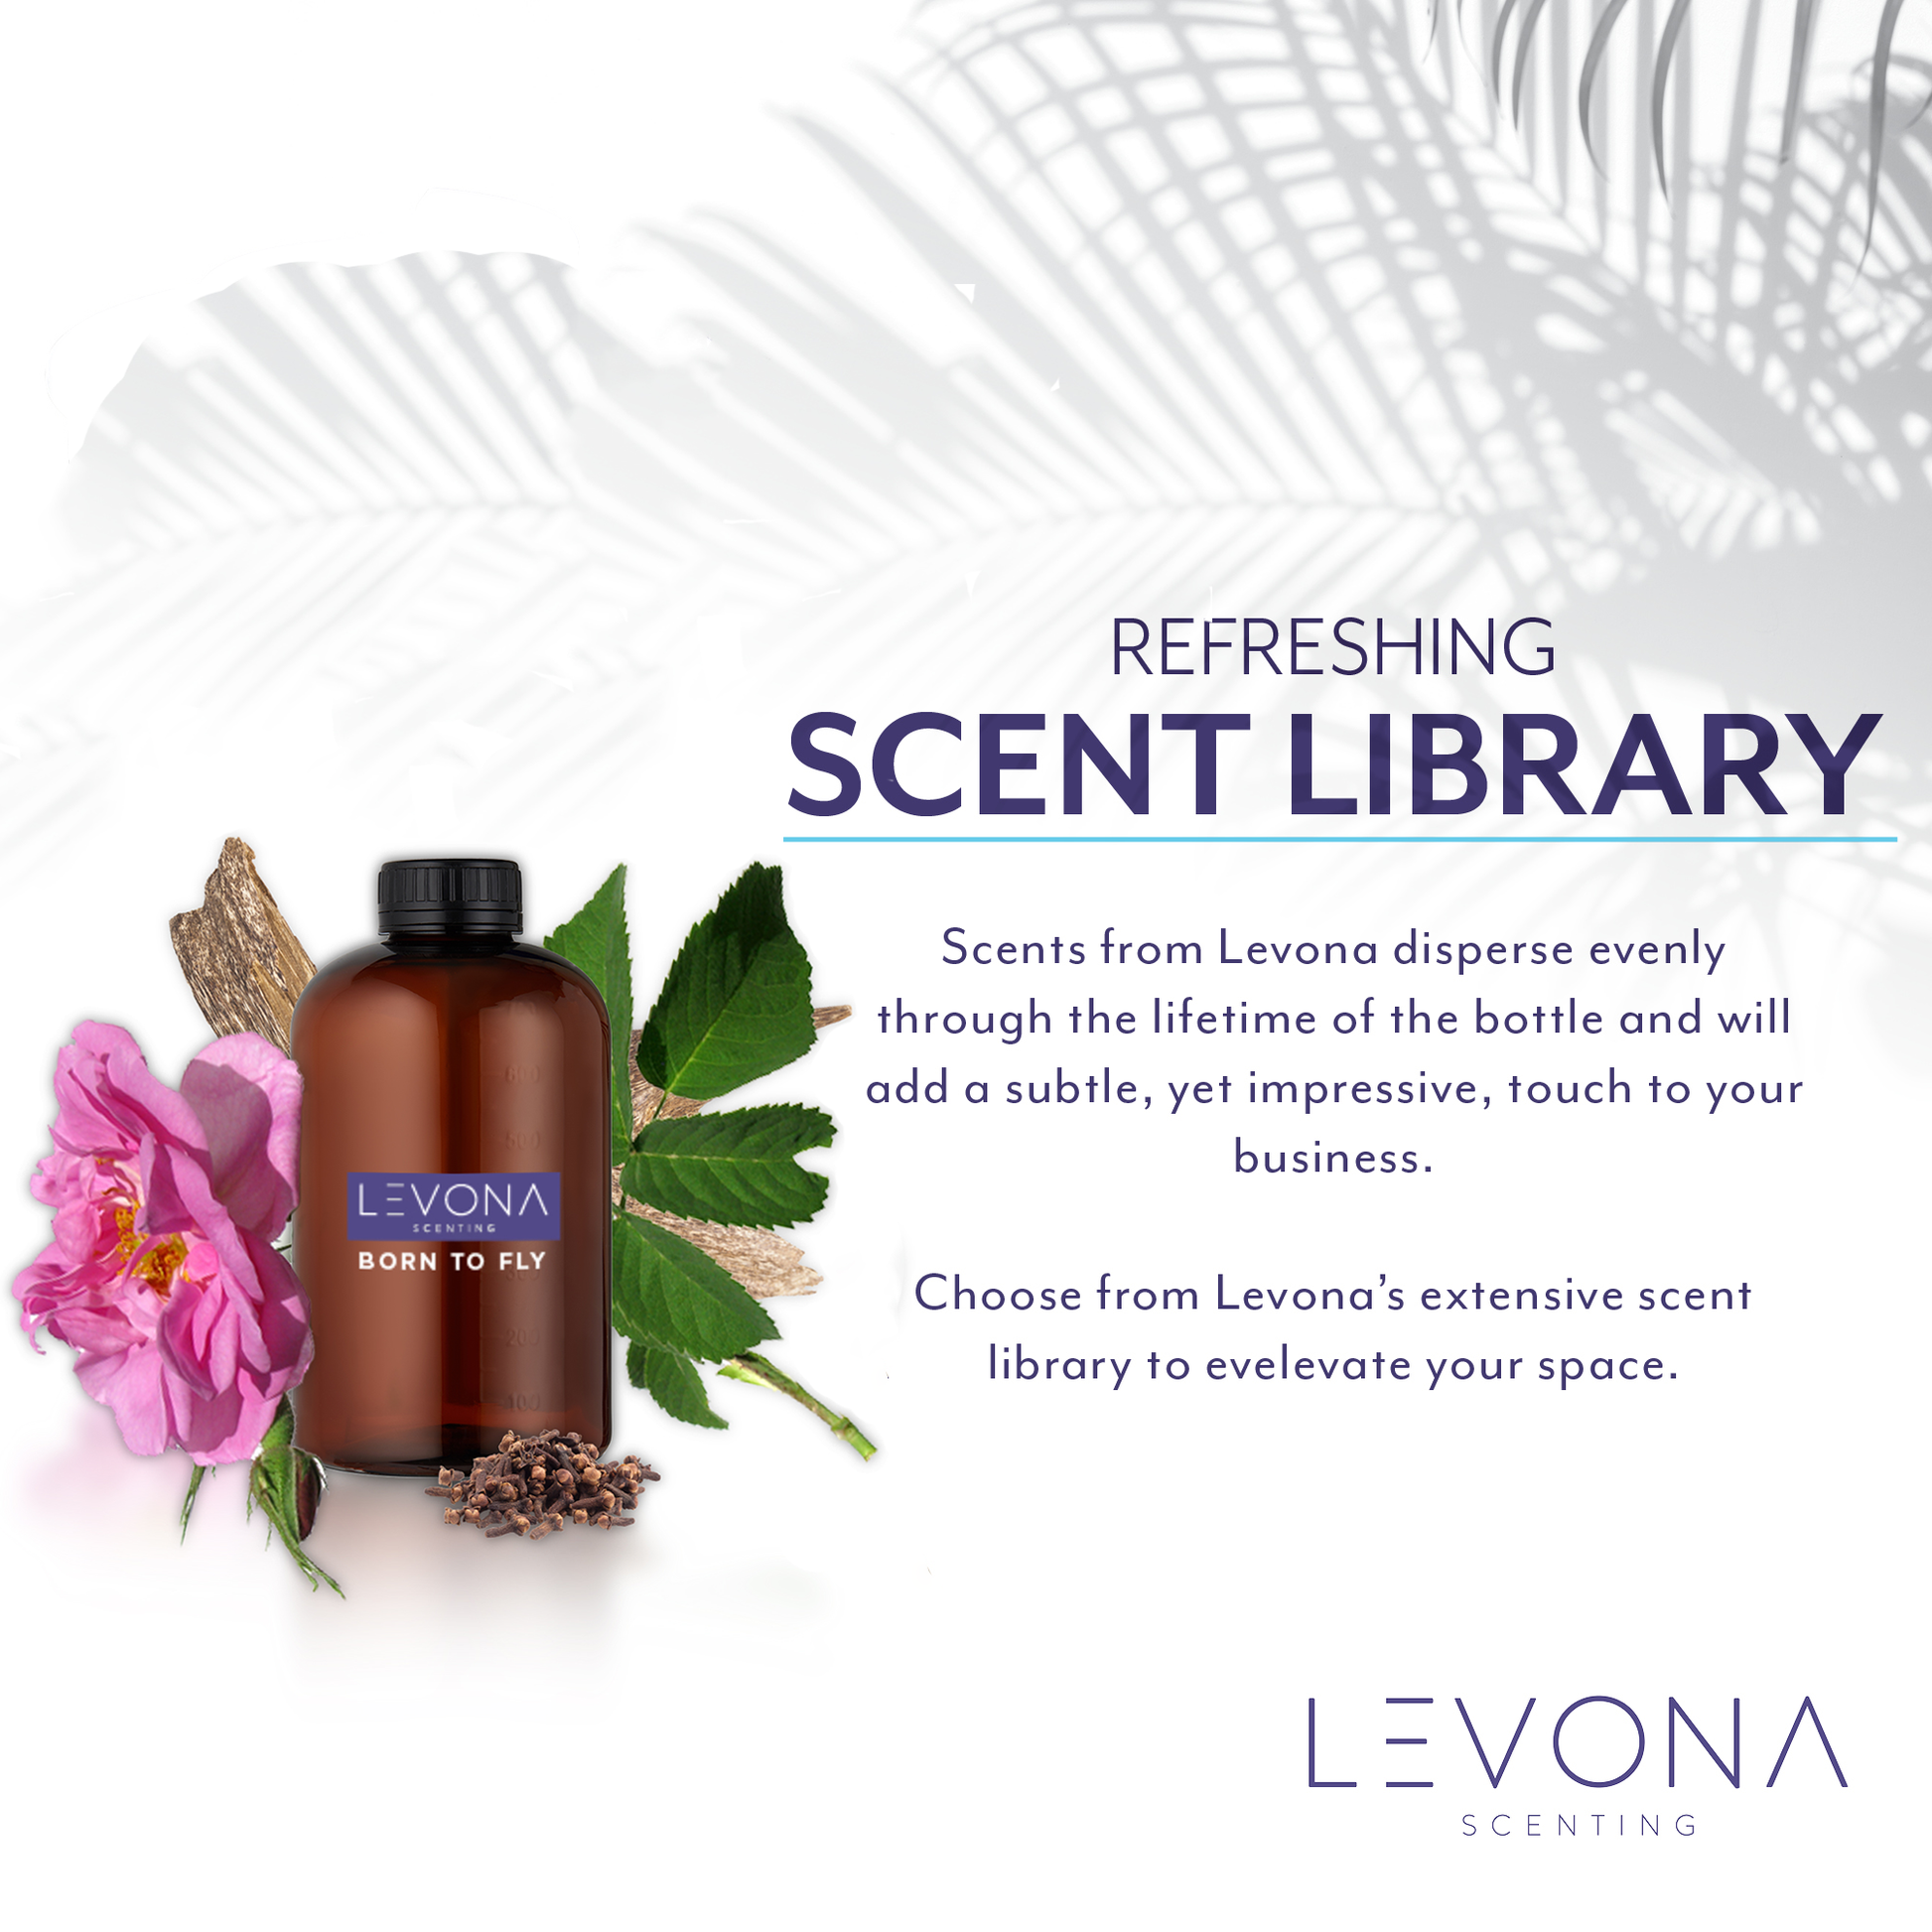 Levona Scents Oil Diffuser Essential Oils: Fragrance Oil for Diffuser -  Black Velvet Diffuser Oils Scents - Woody Citrus with Herbal Floral  Essential